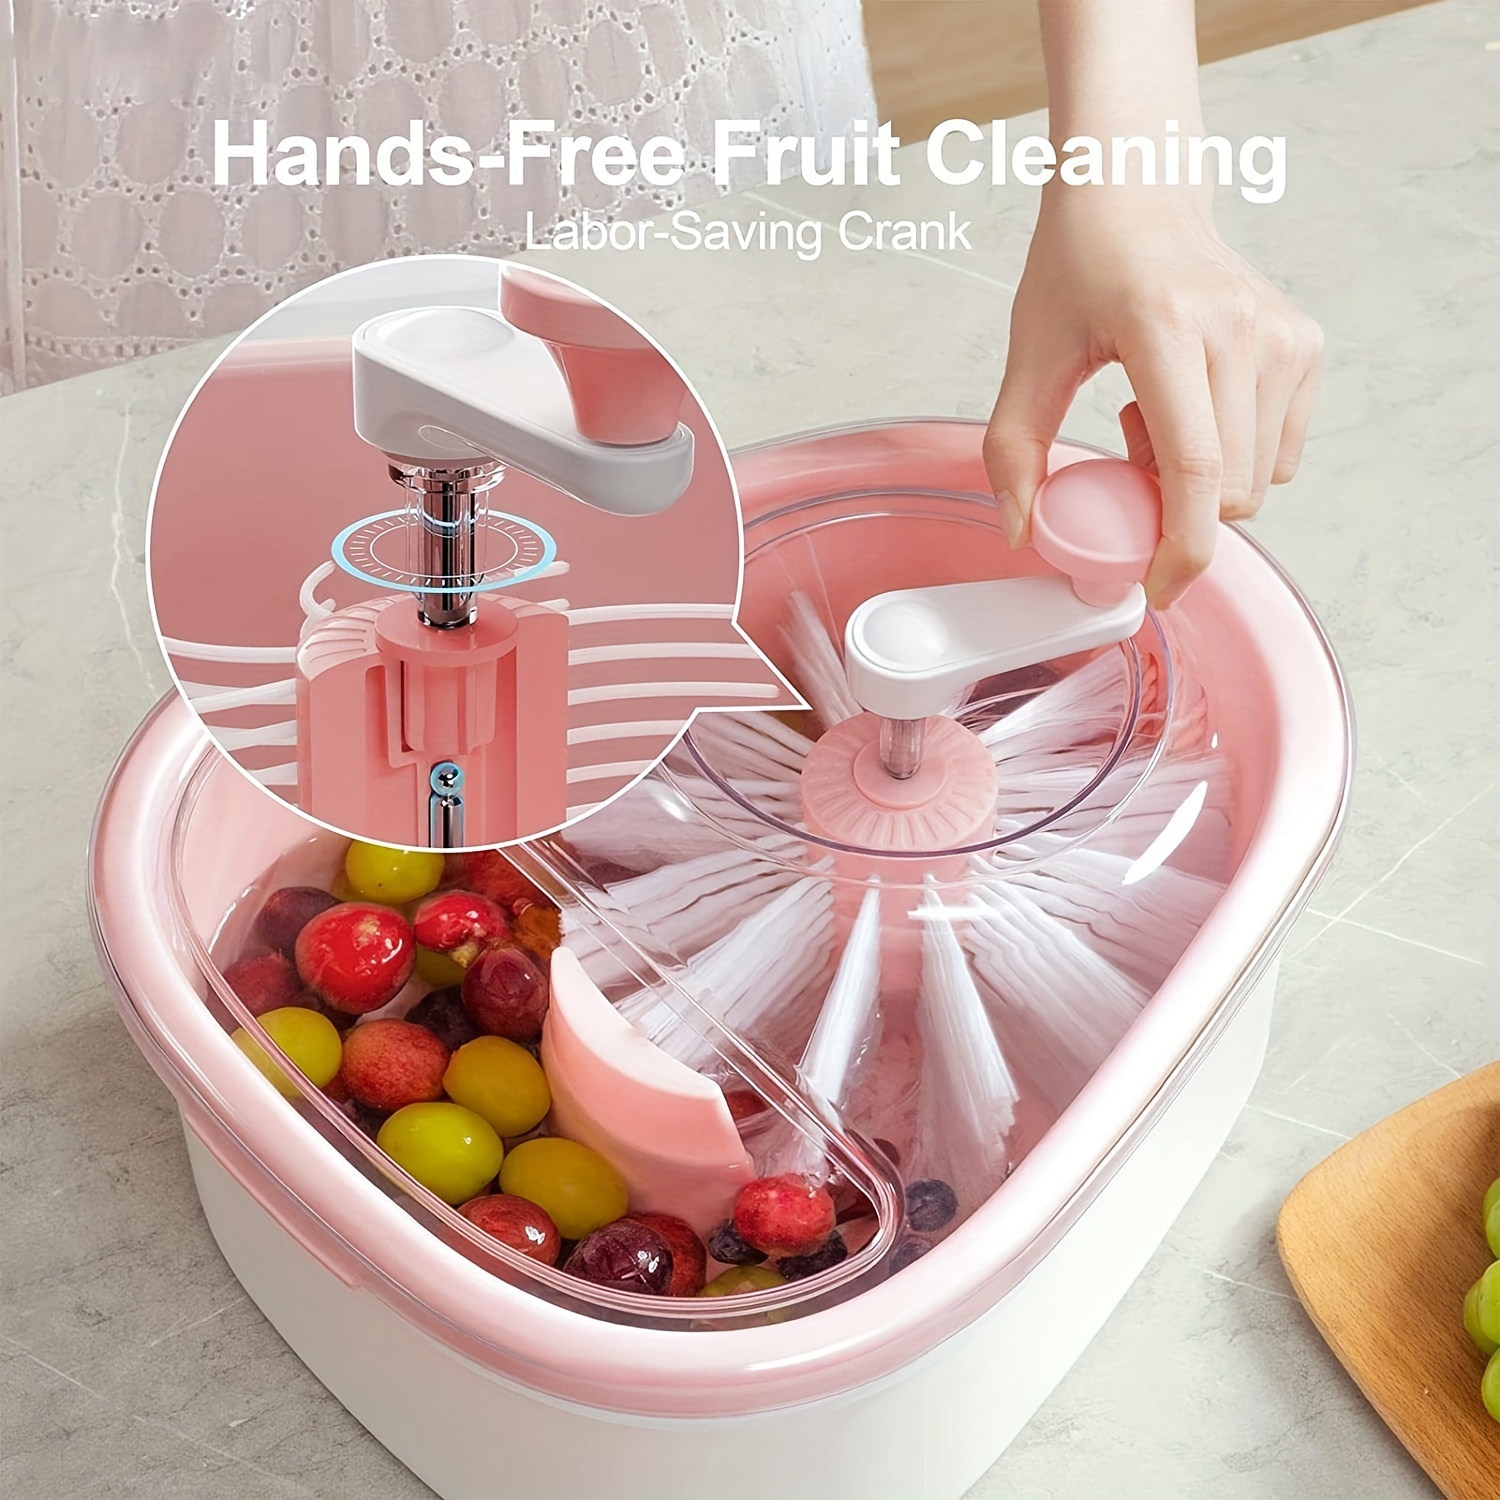 Fruit and Vegetable Cleaner